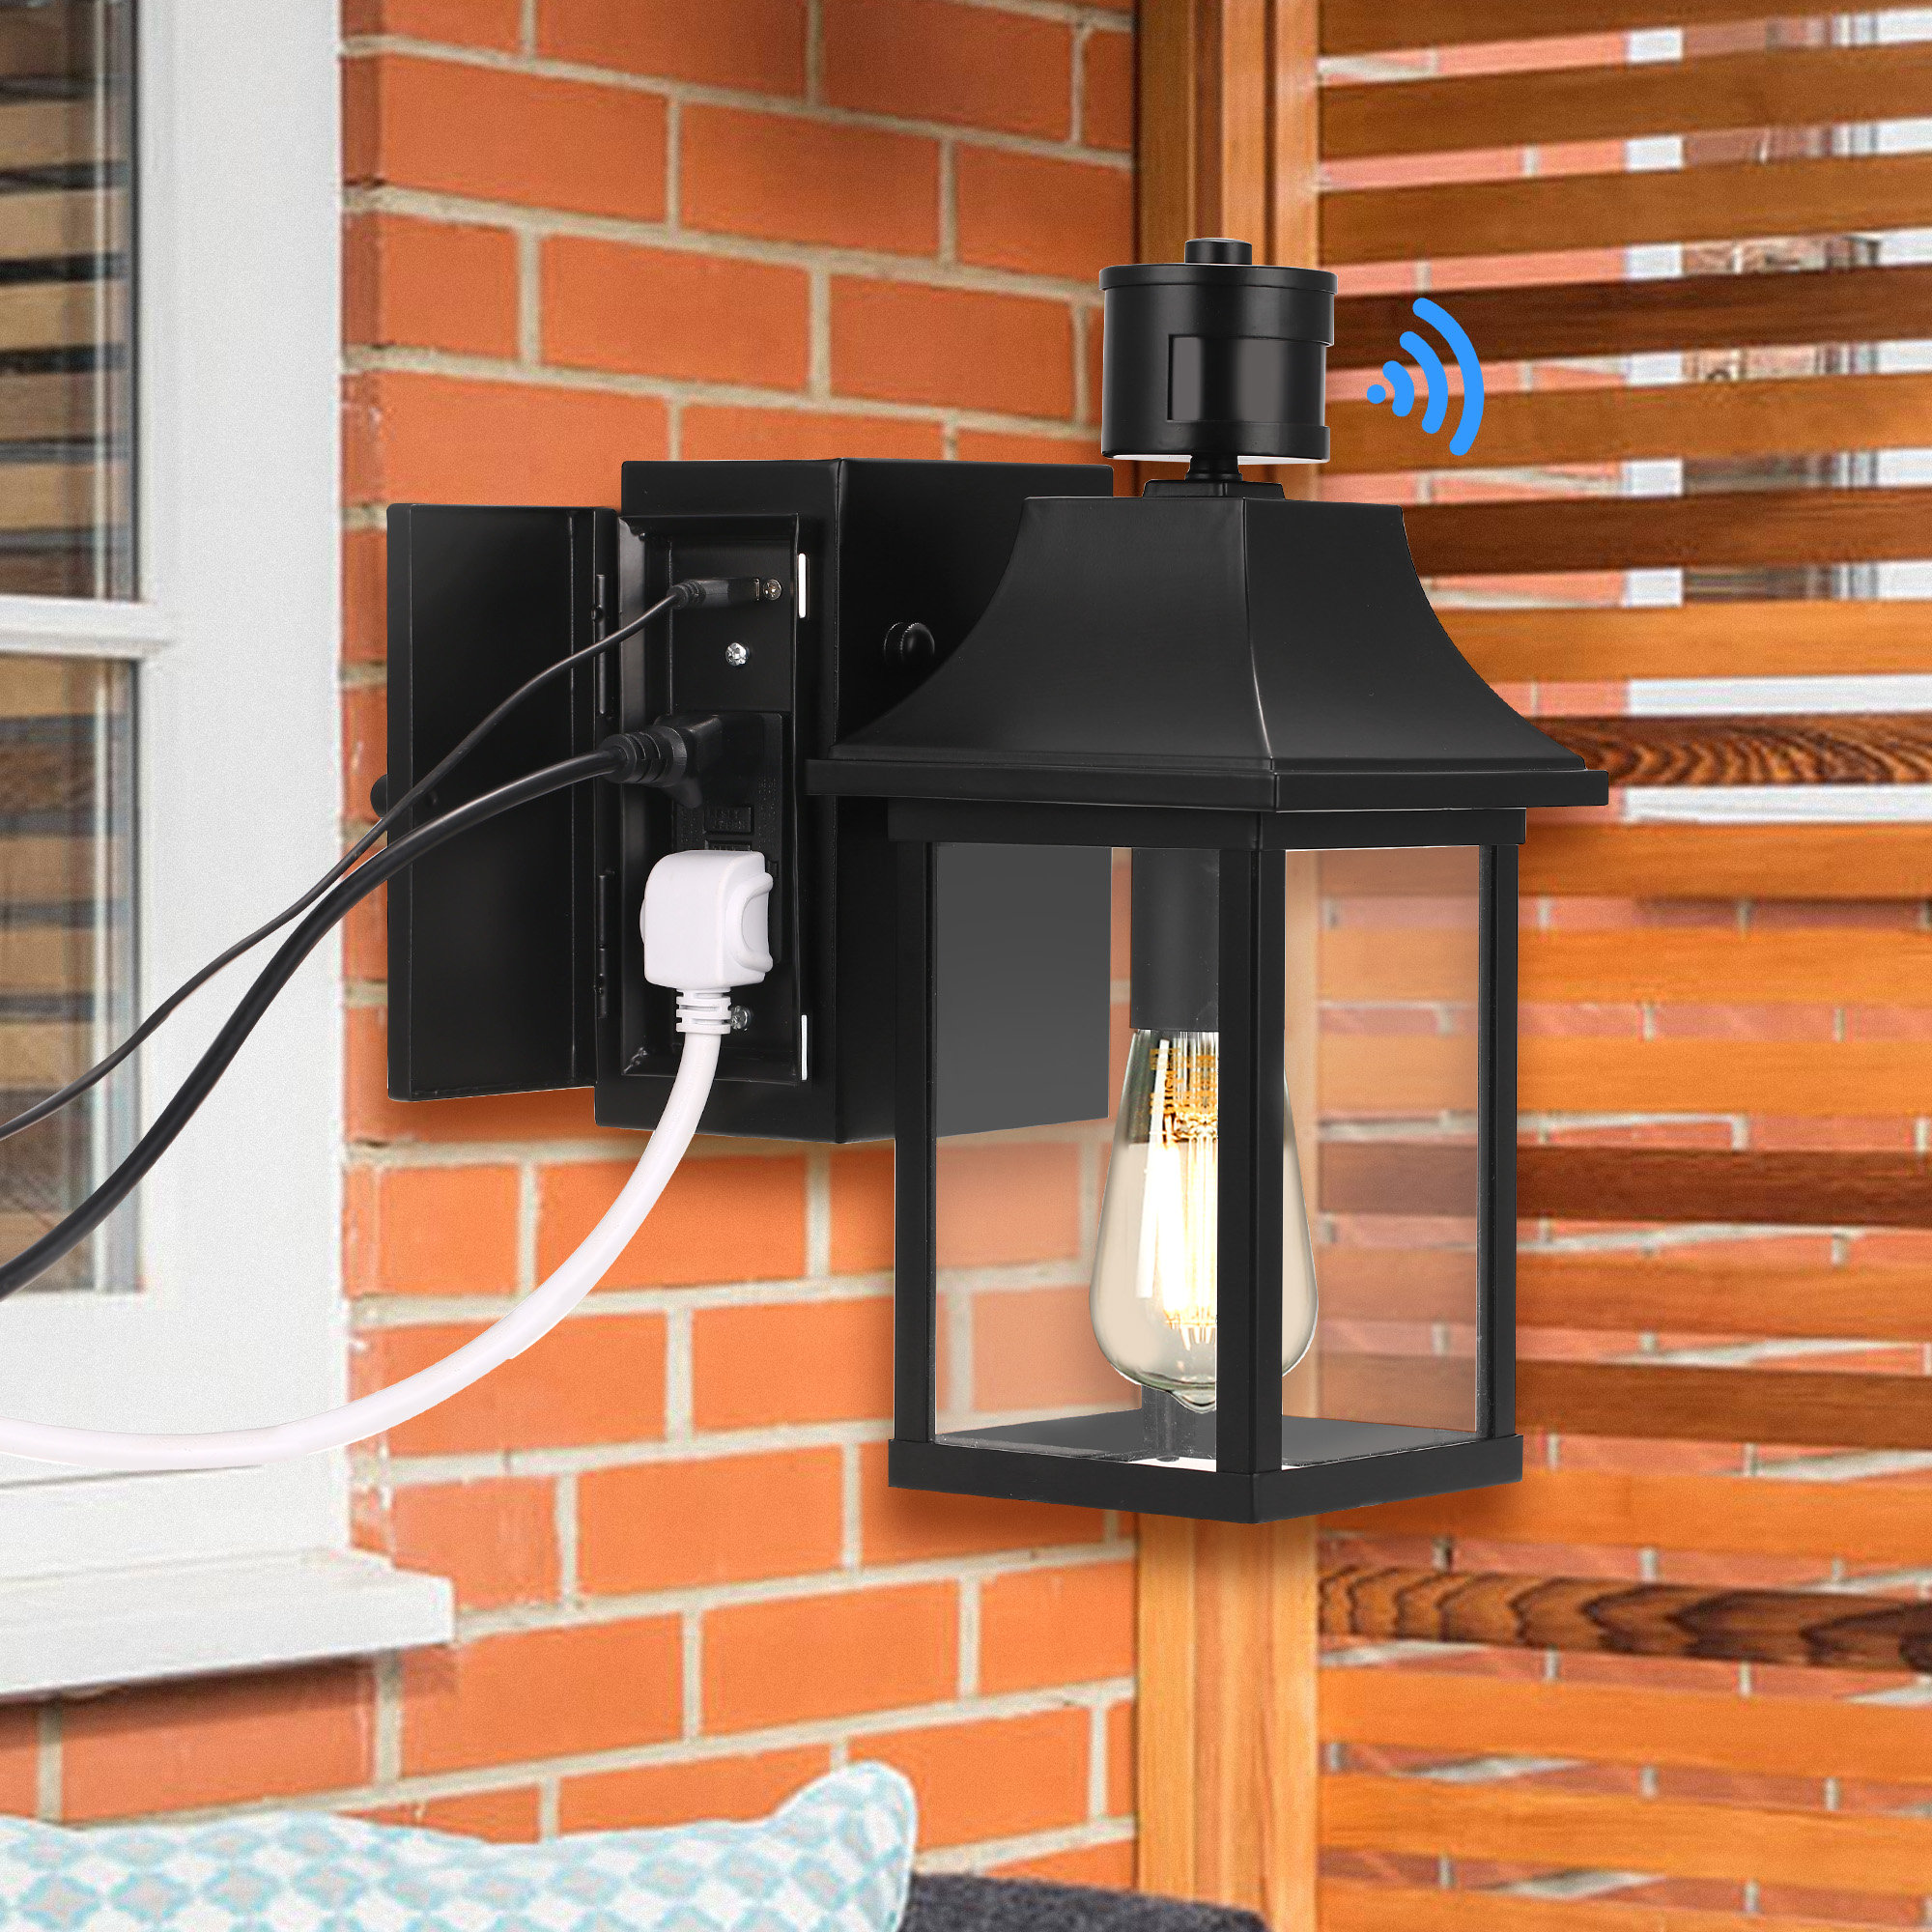 Arlmont  Co. Nyomie 1-Light Black Dusk to Dawn Motion Sensor Outdoor Wall  Lantern Sconce,Built-In GFCI and USB Outlets Wayfair